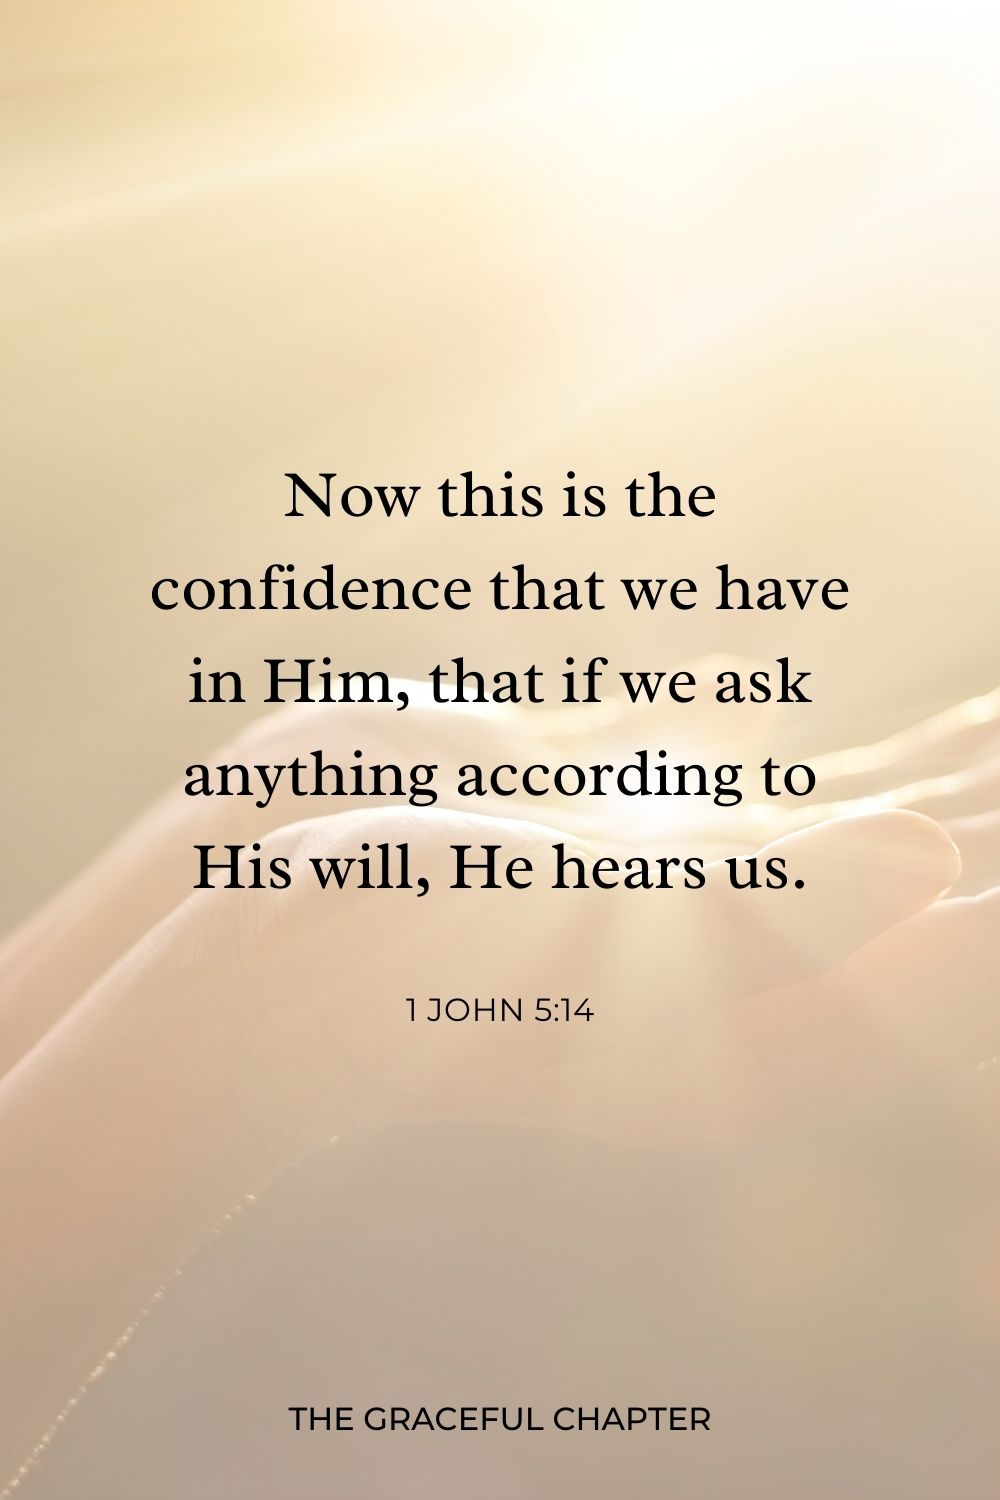 Now this is the confidence that we have in Him, that if we ask anything according to His will, He hears us. 1 John 5:14